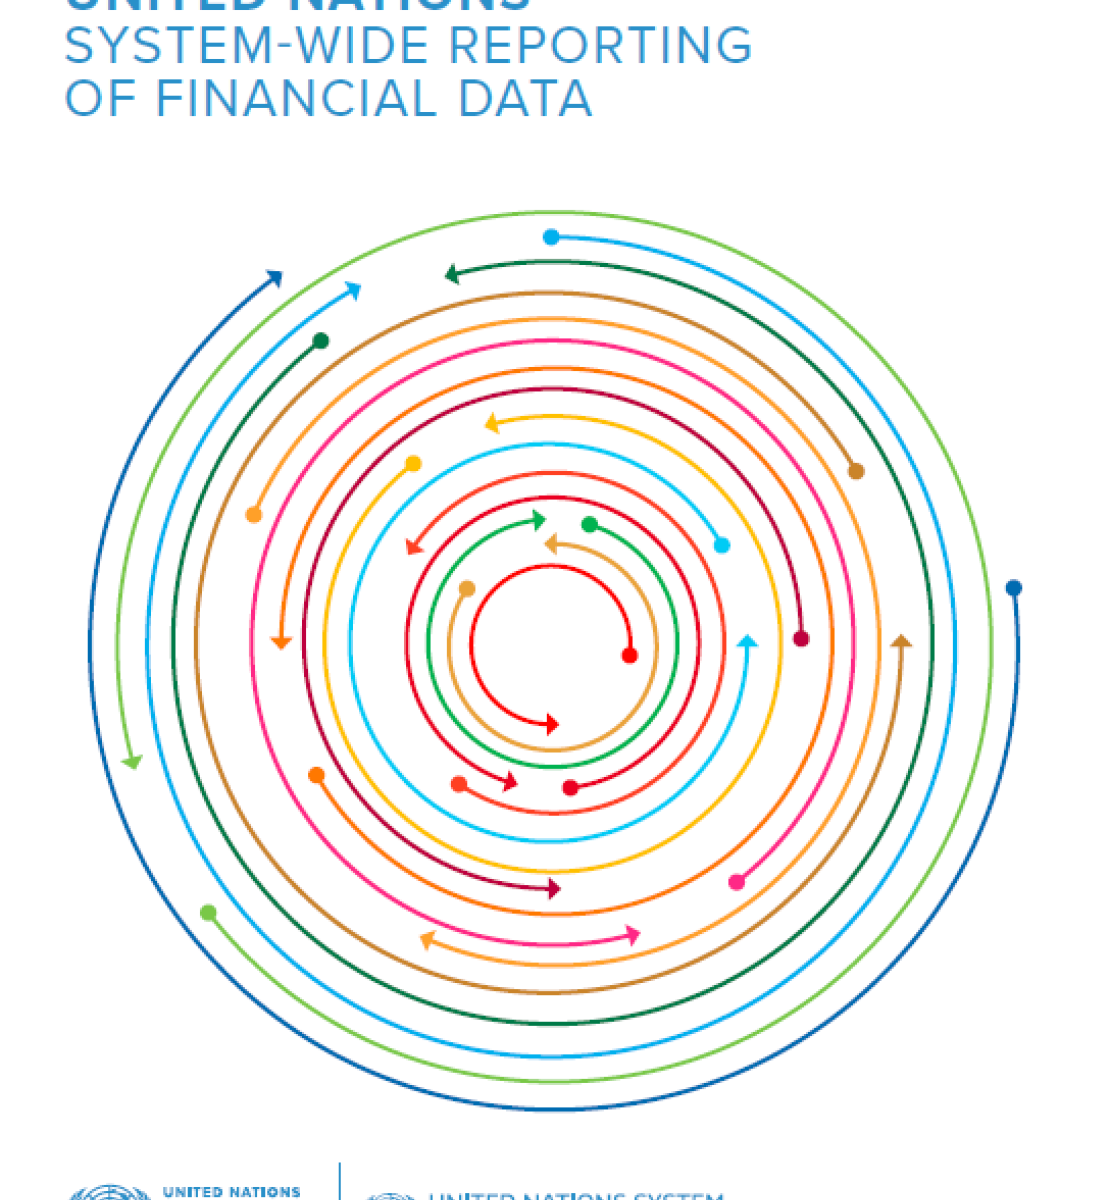 Data Standards for United Nations System-Wide Reporting of Financial Data